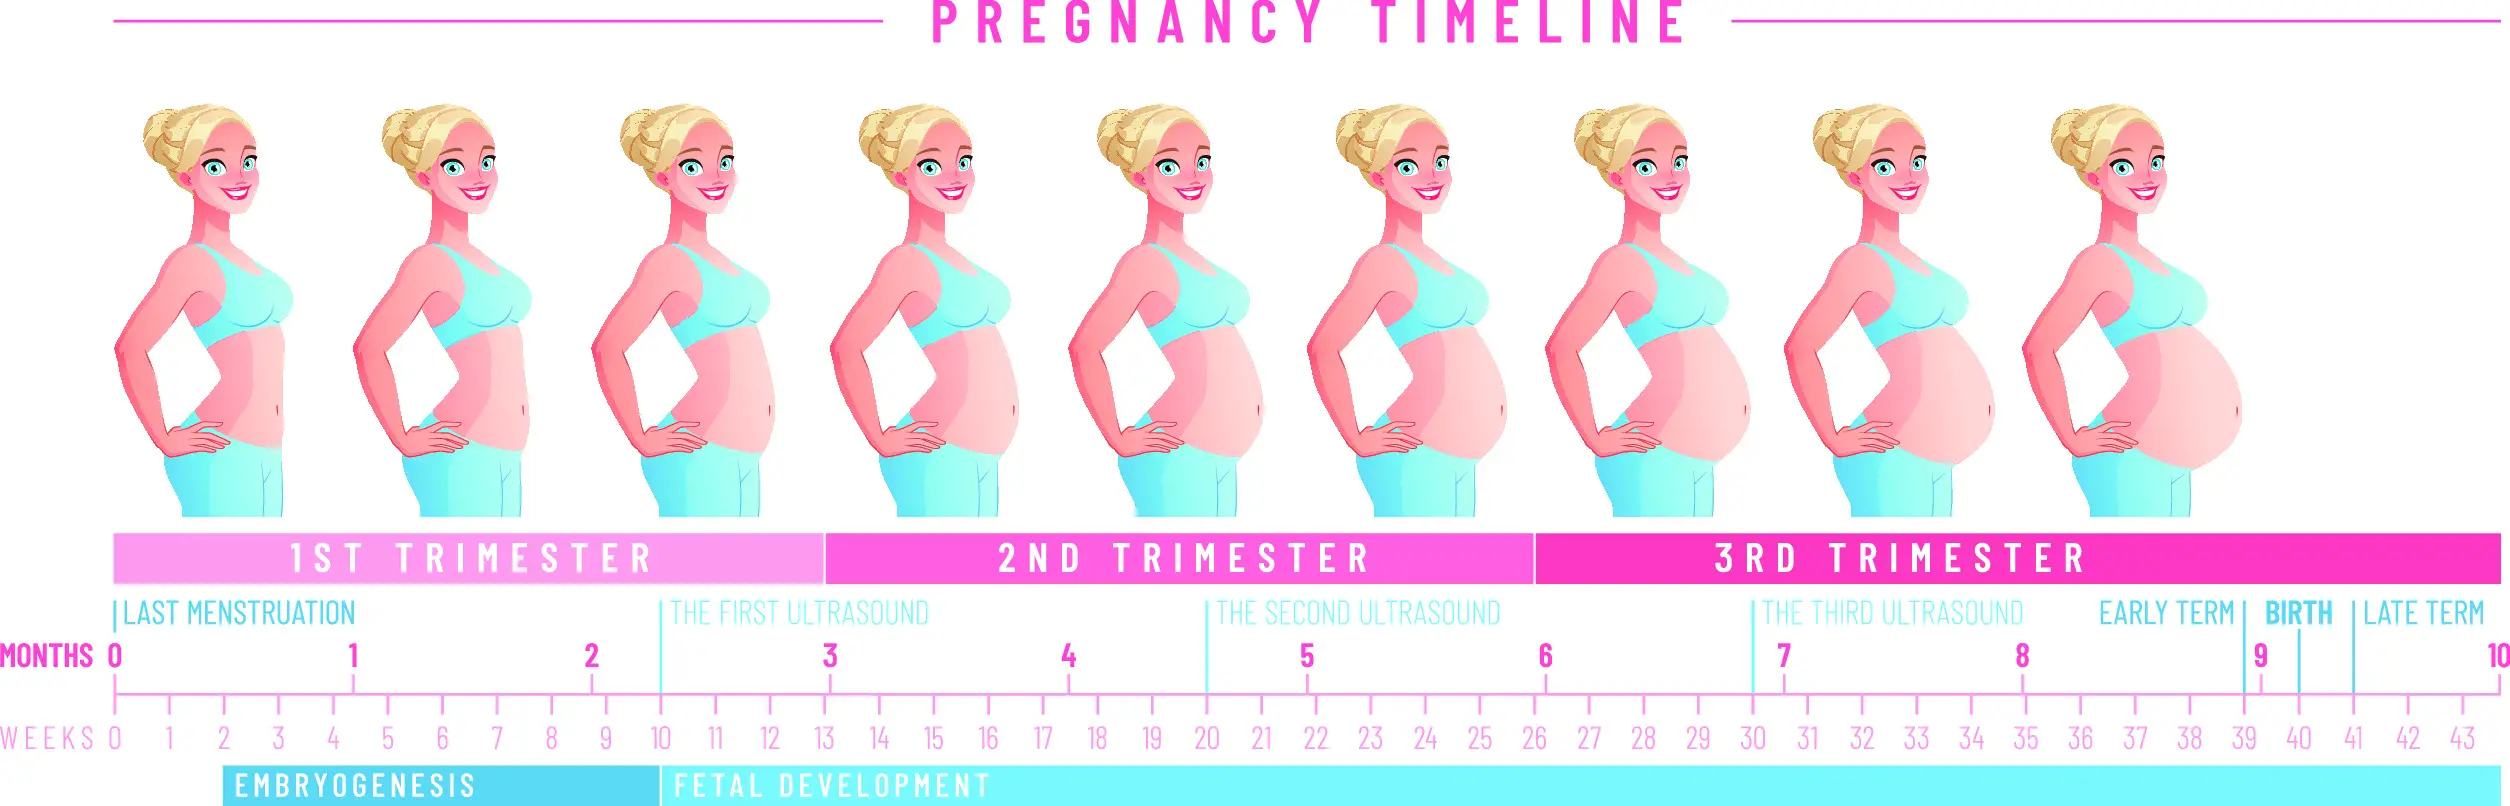 How Long Is a Trimester of Pregnancy?